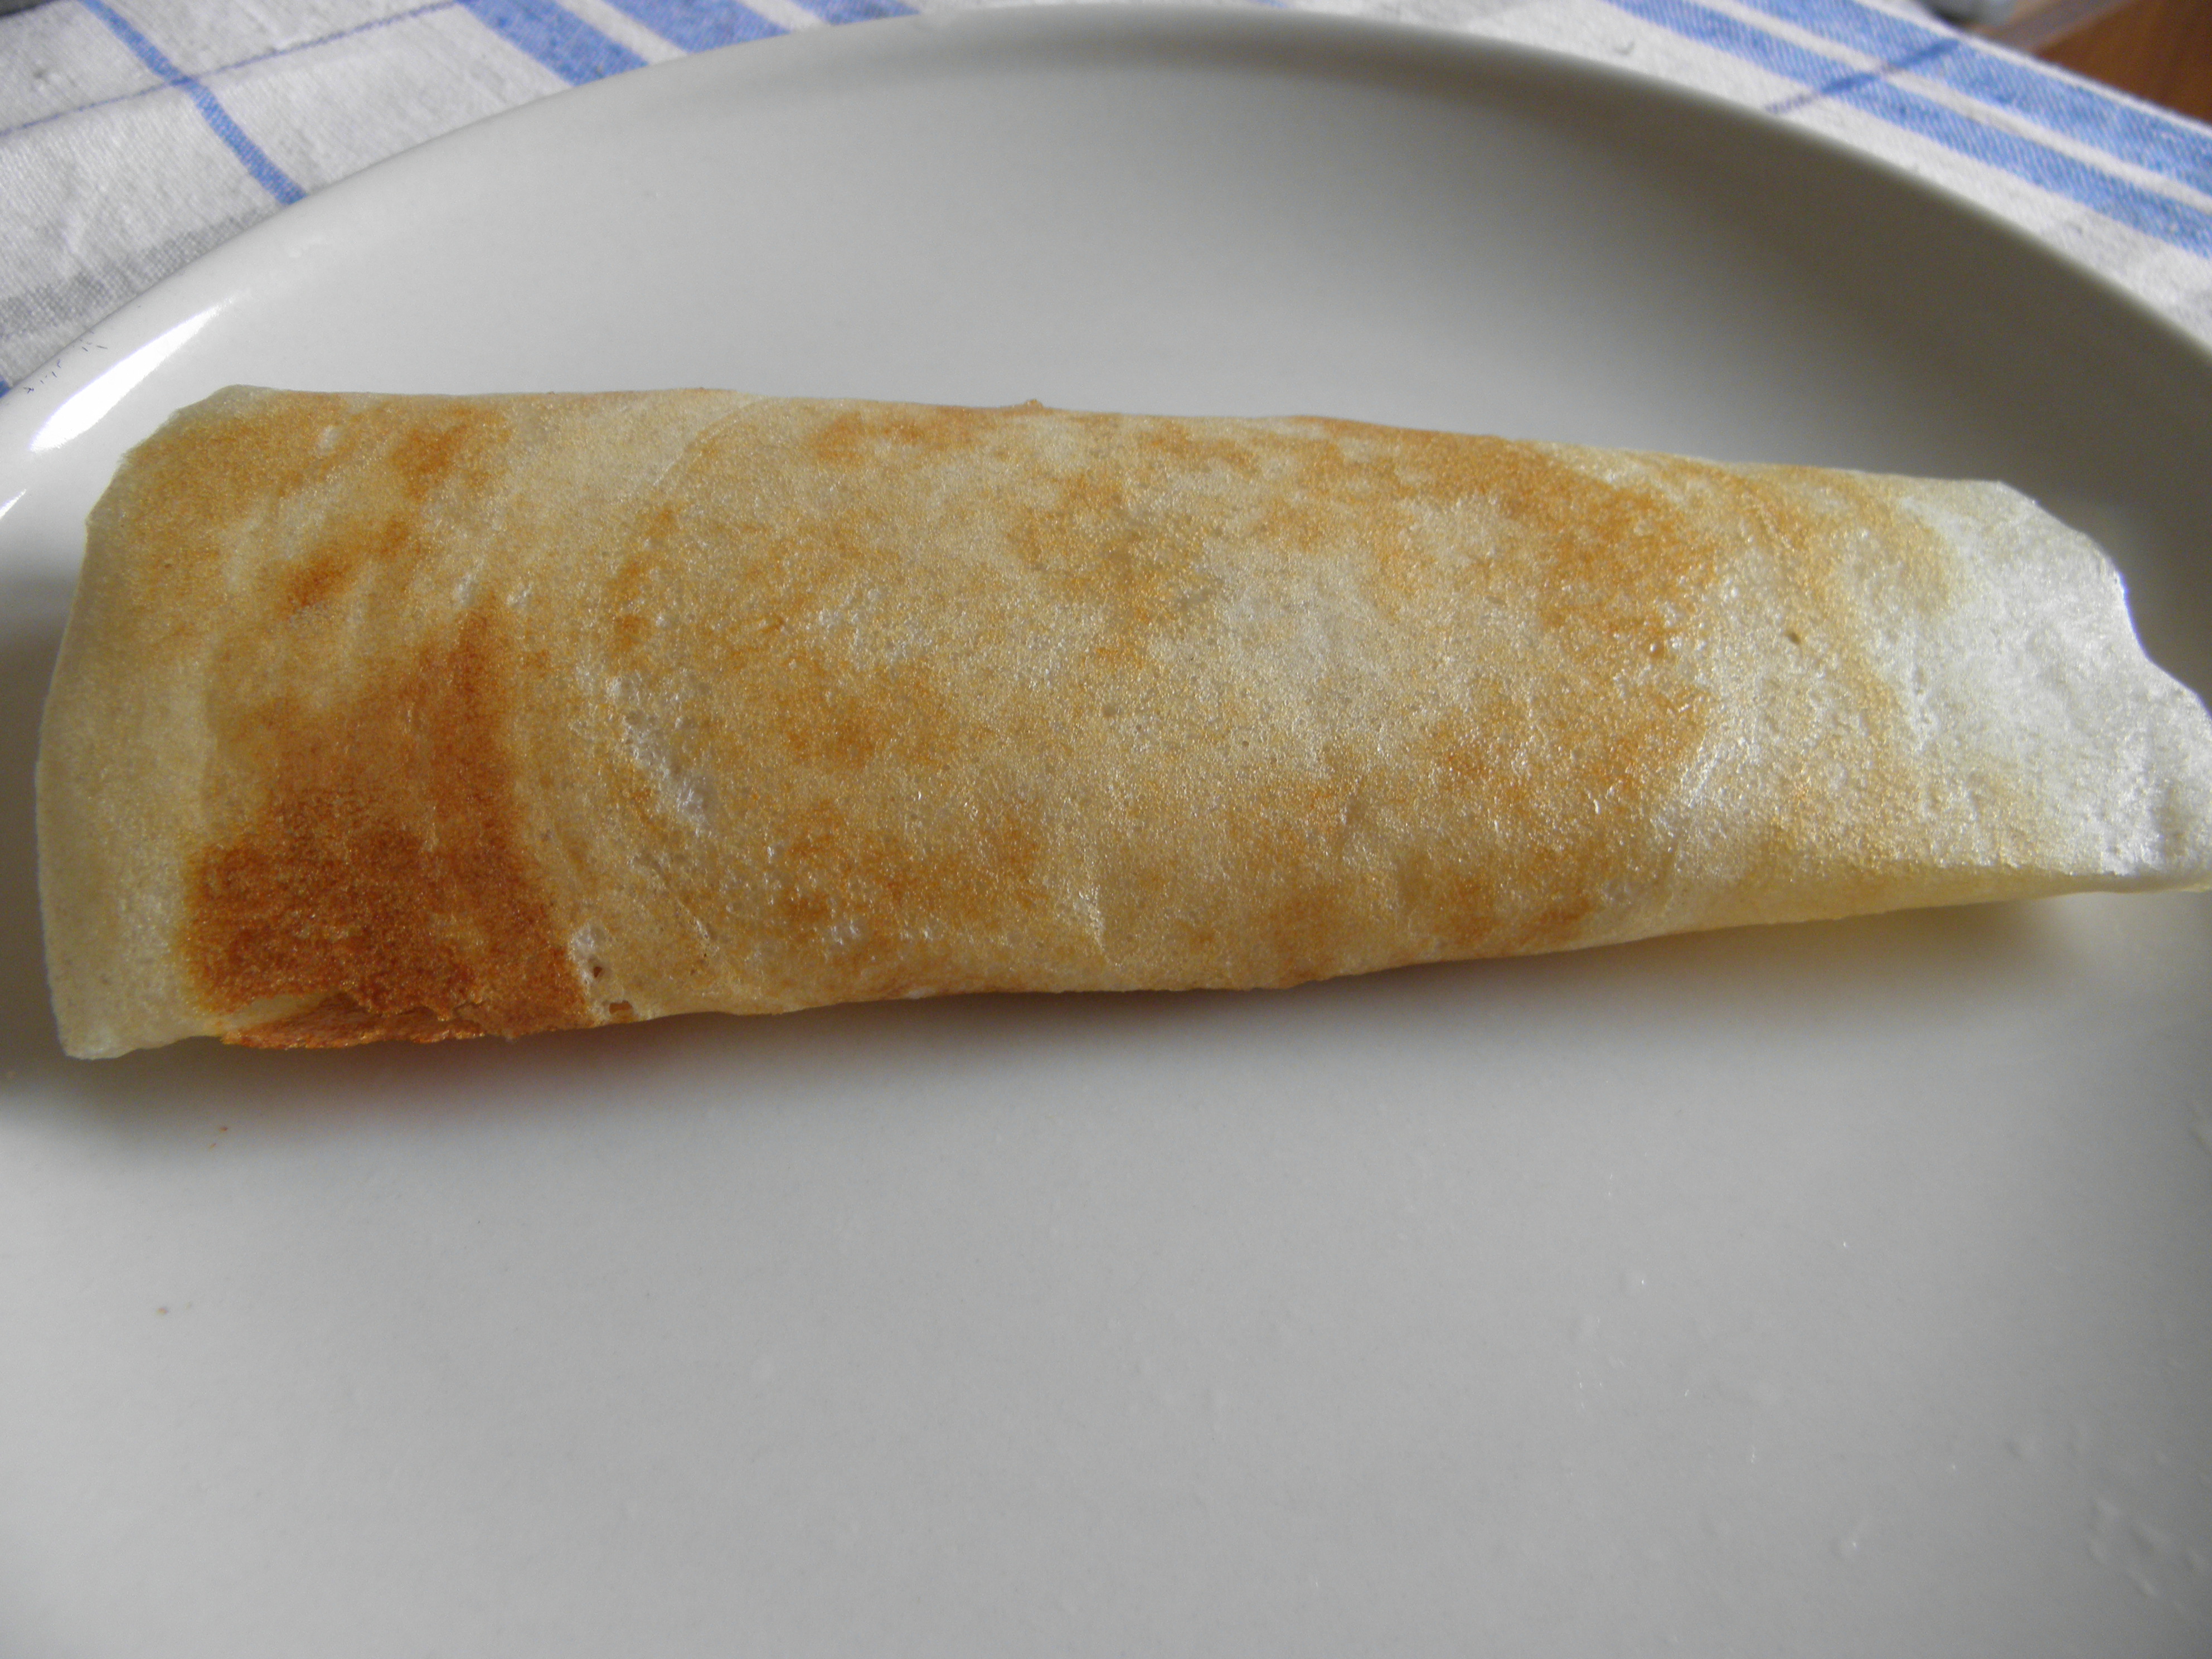 Masala dosa is ready to serve :)